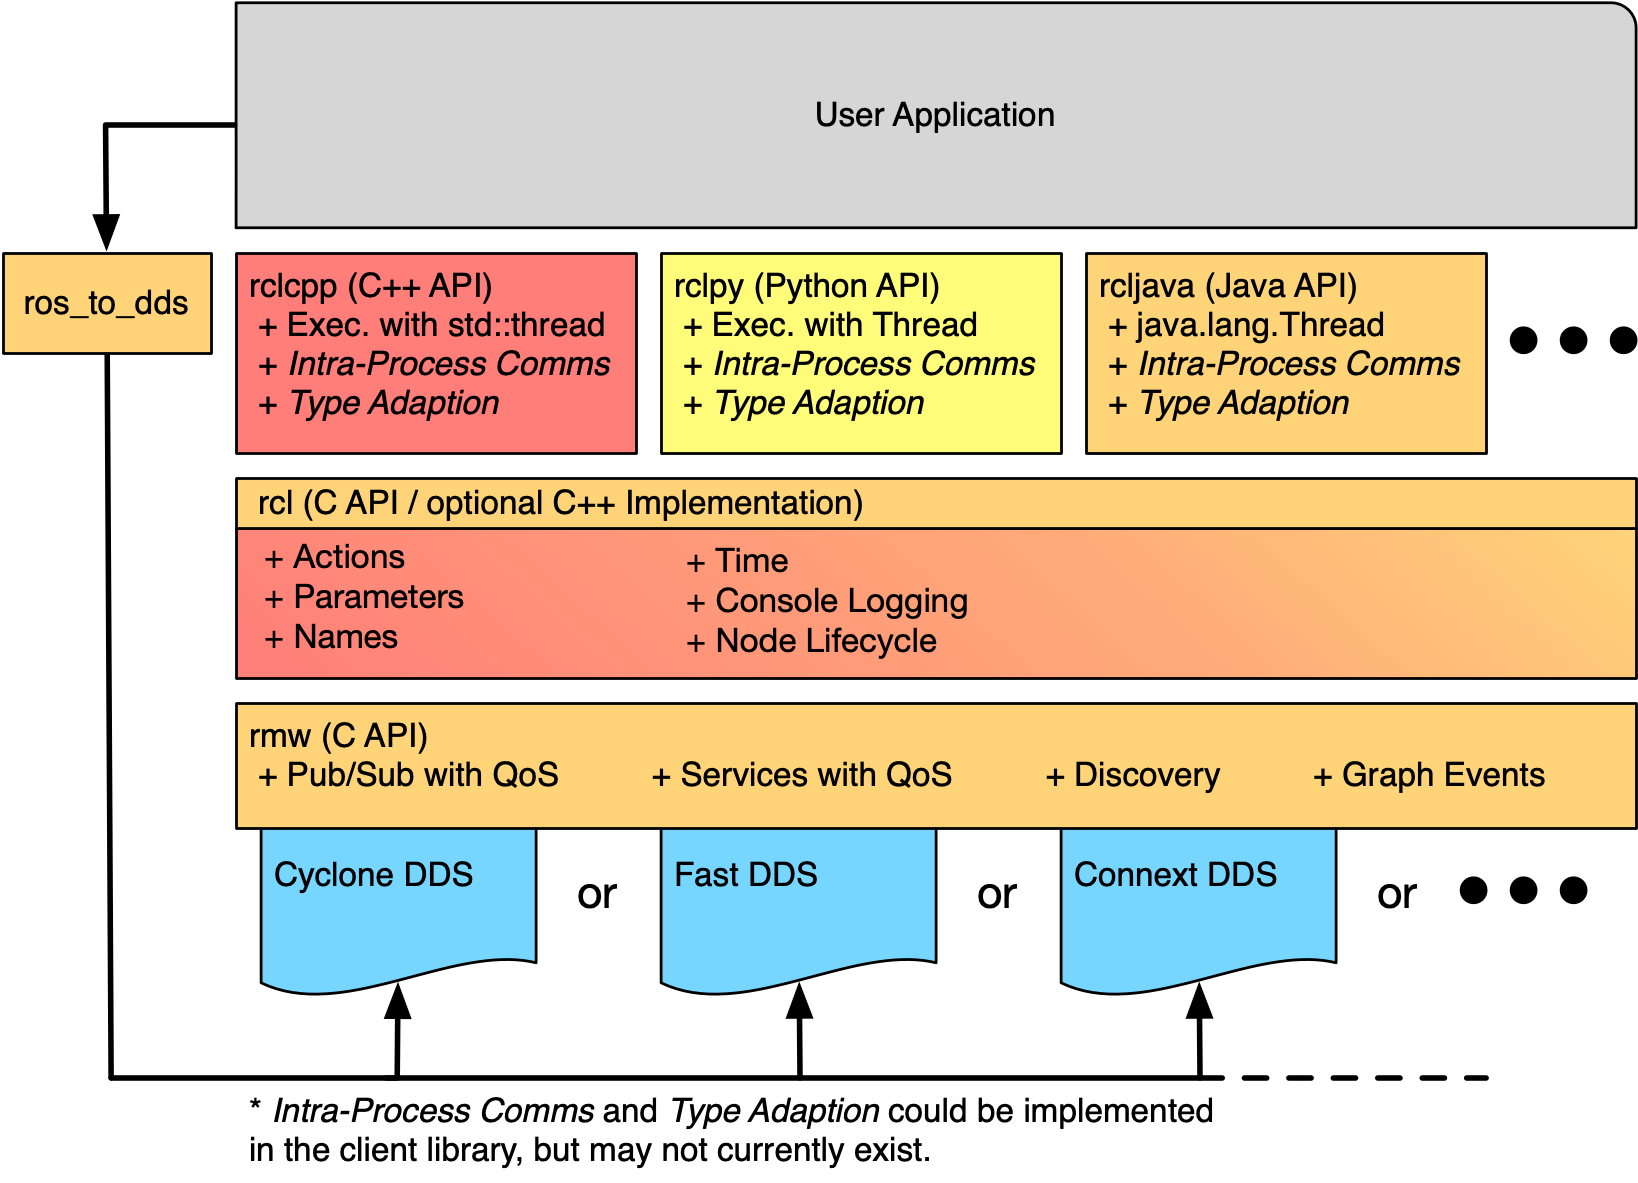 ros2 software stack